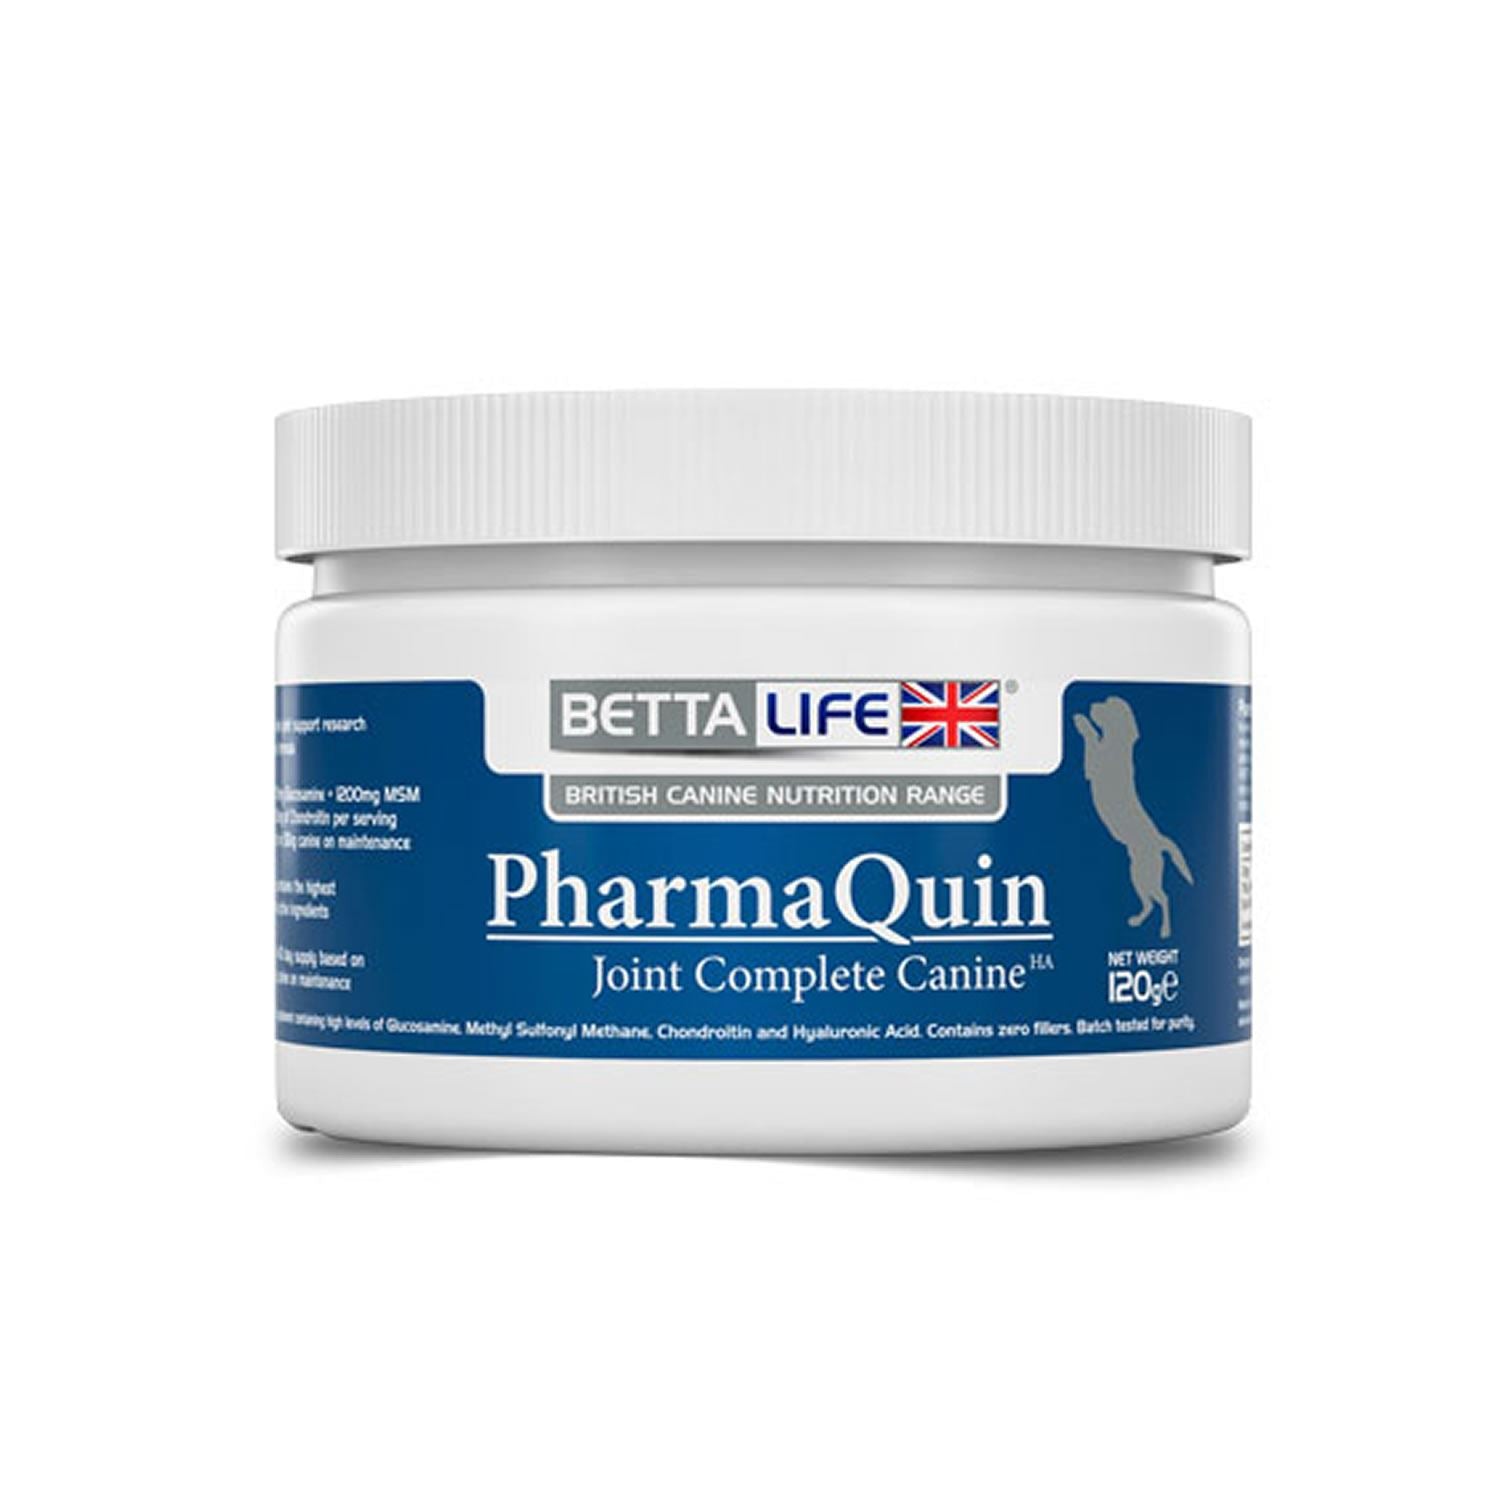 Bettalife Pharmaquin Joint Complete Ha Canine - Just Horse Riders